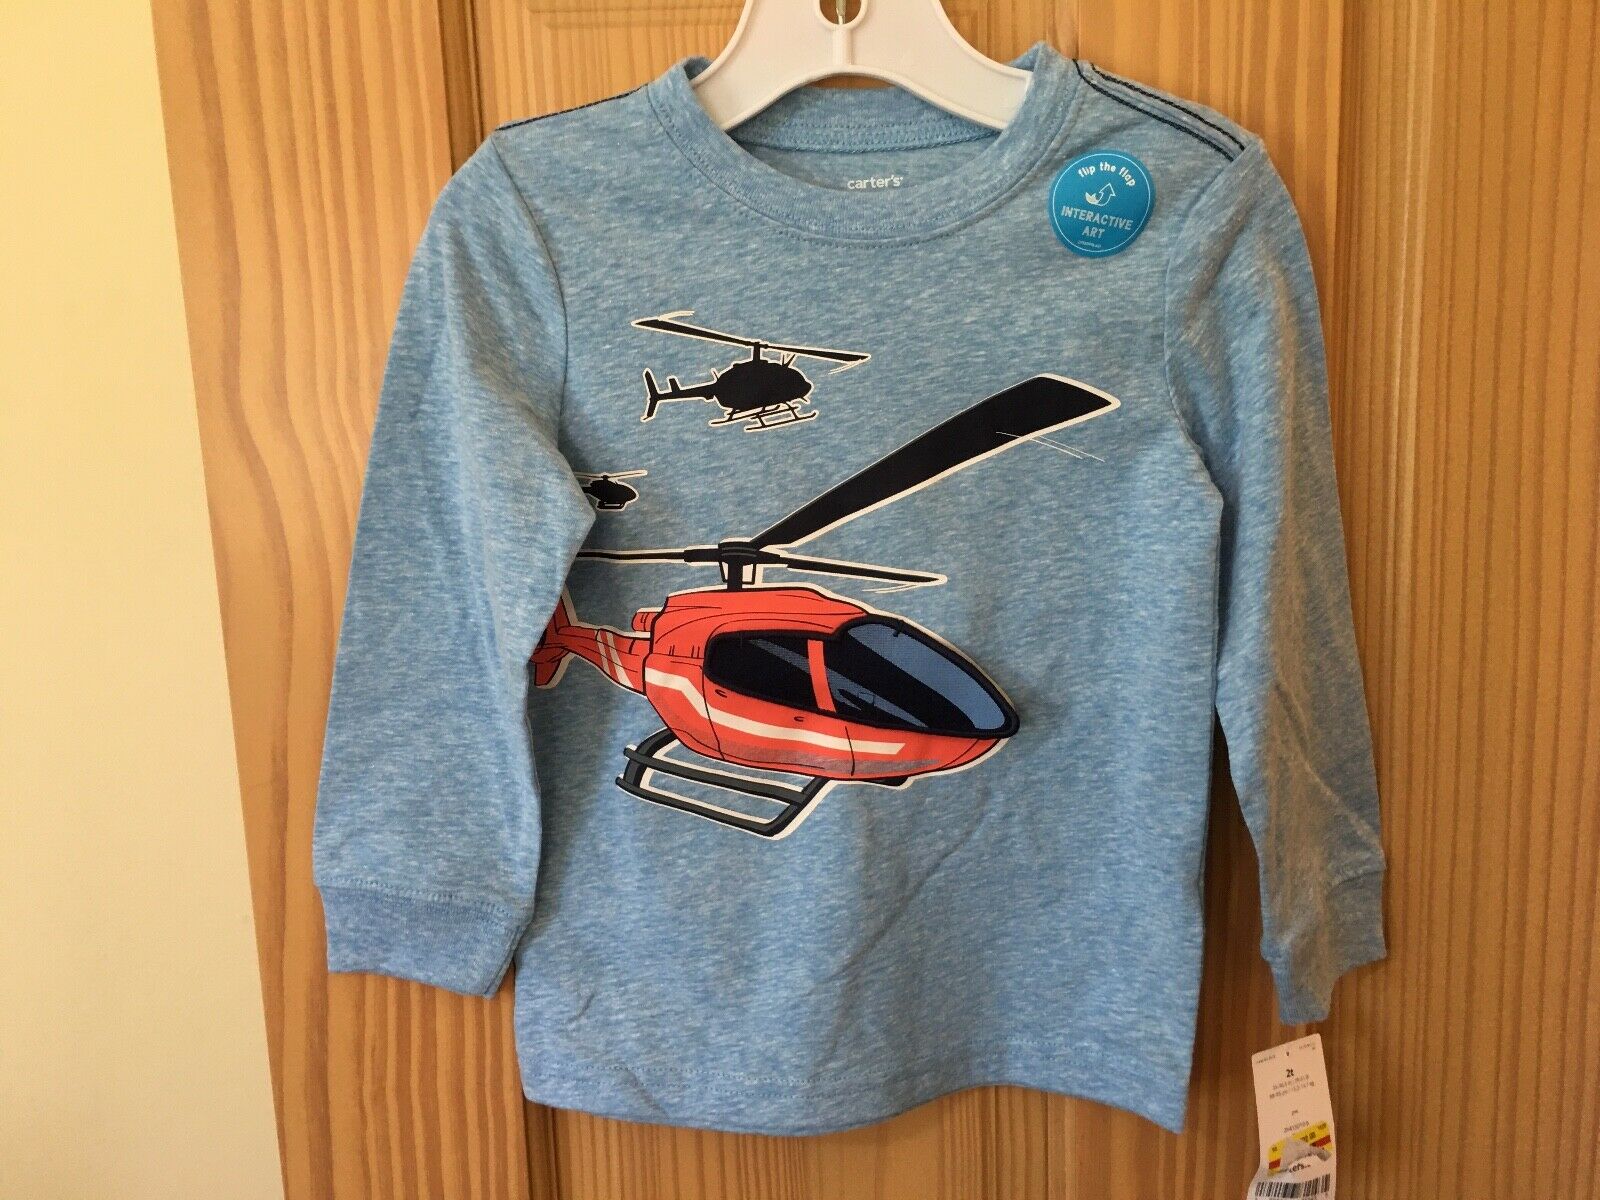 New Carter's Boys Helicopter Tee Shirt Top Toddler Blue Interactive 2t,3t,4t,5t